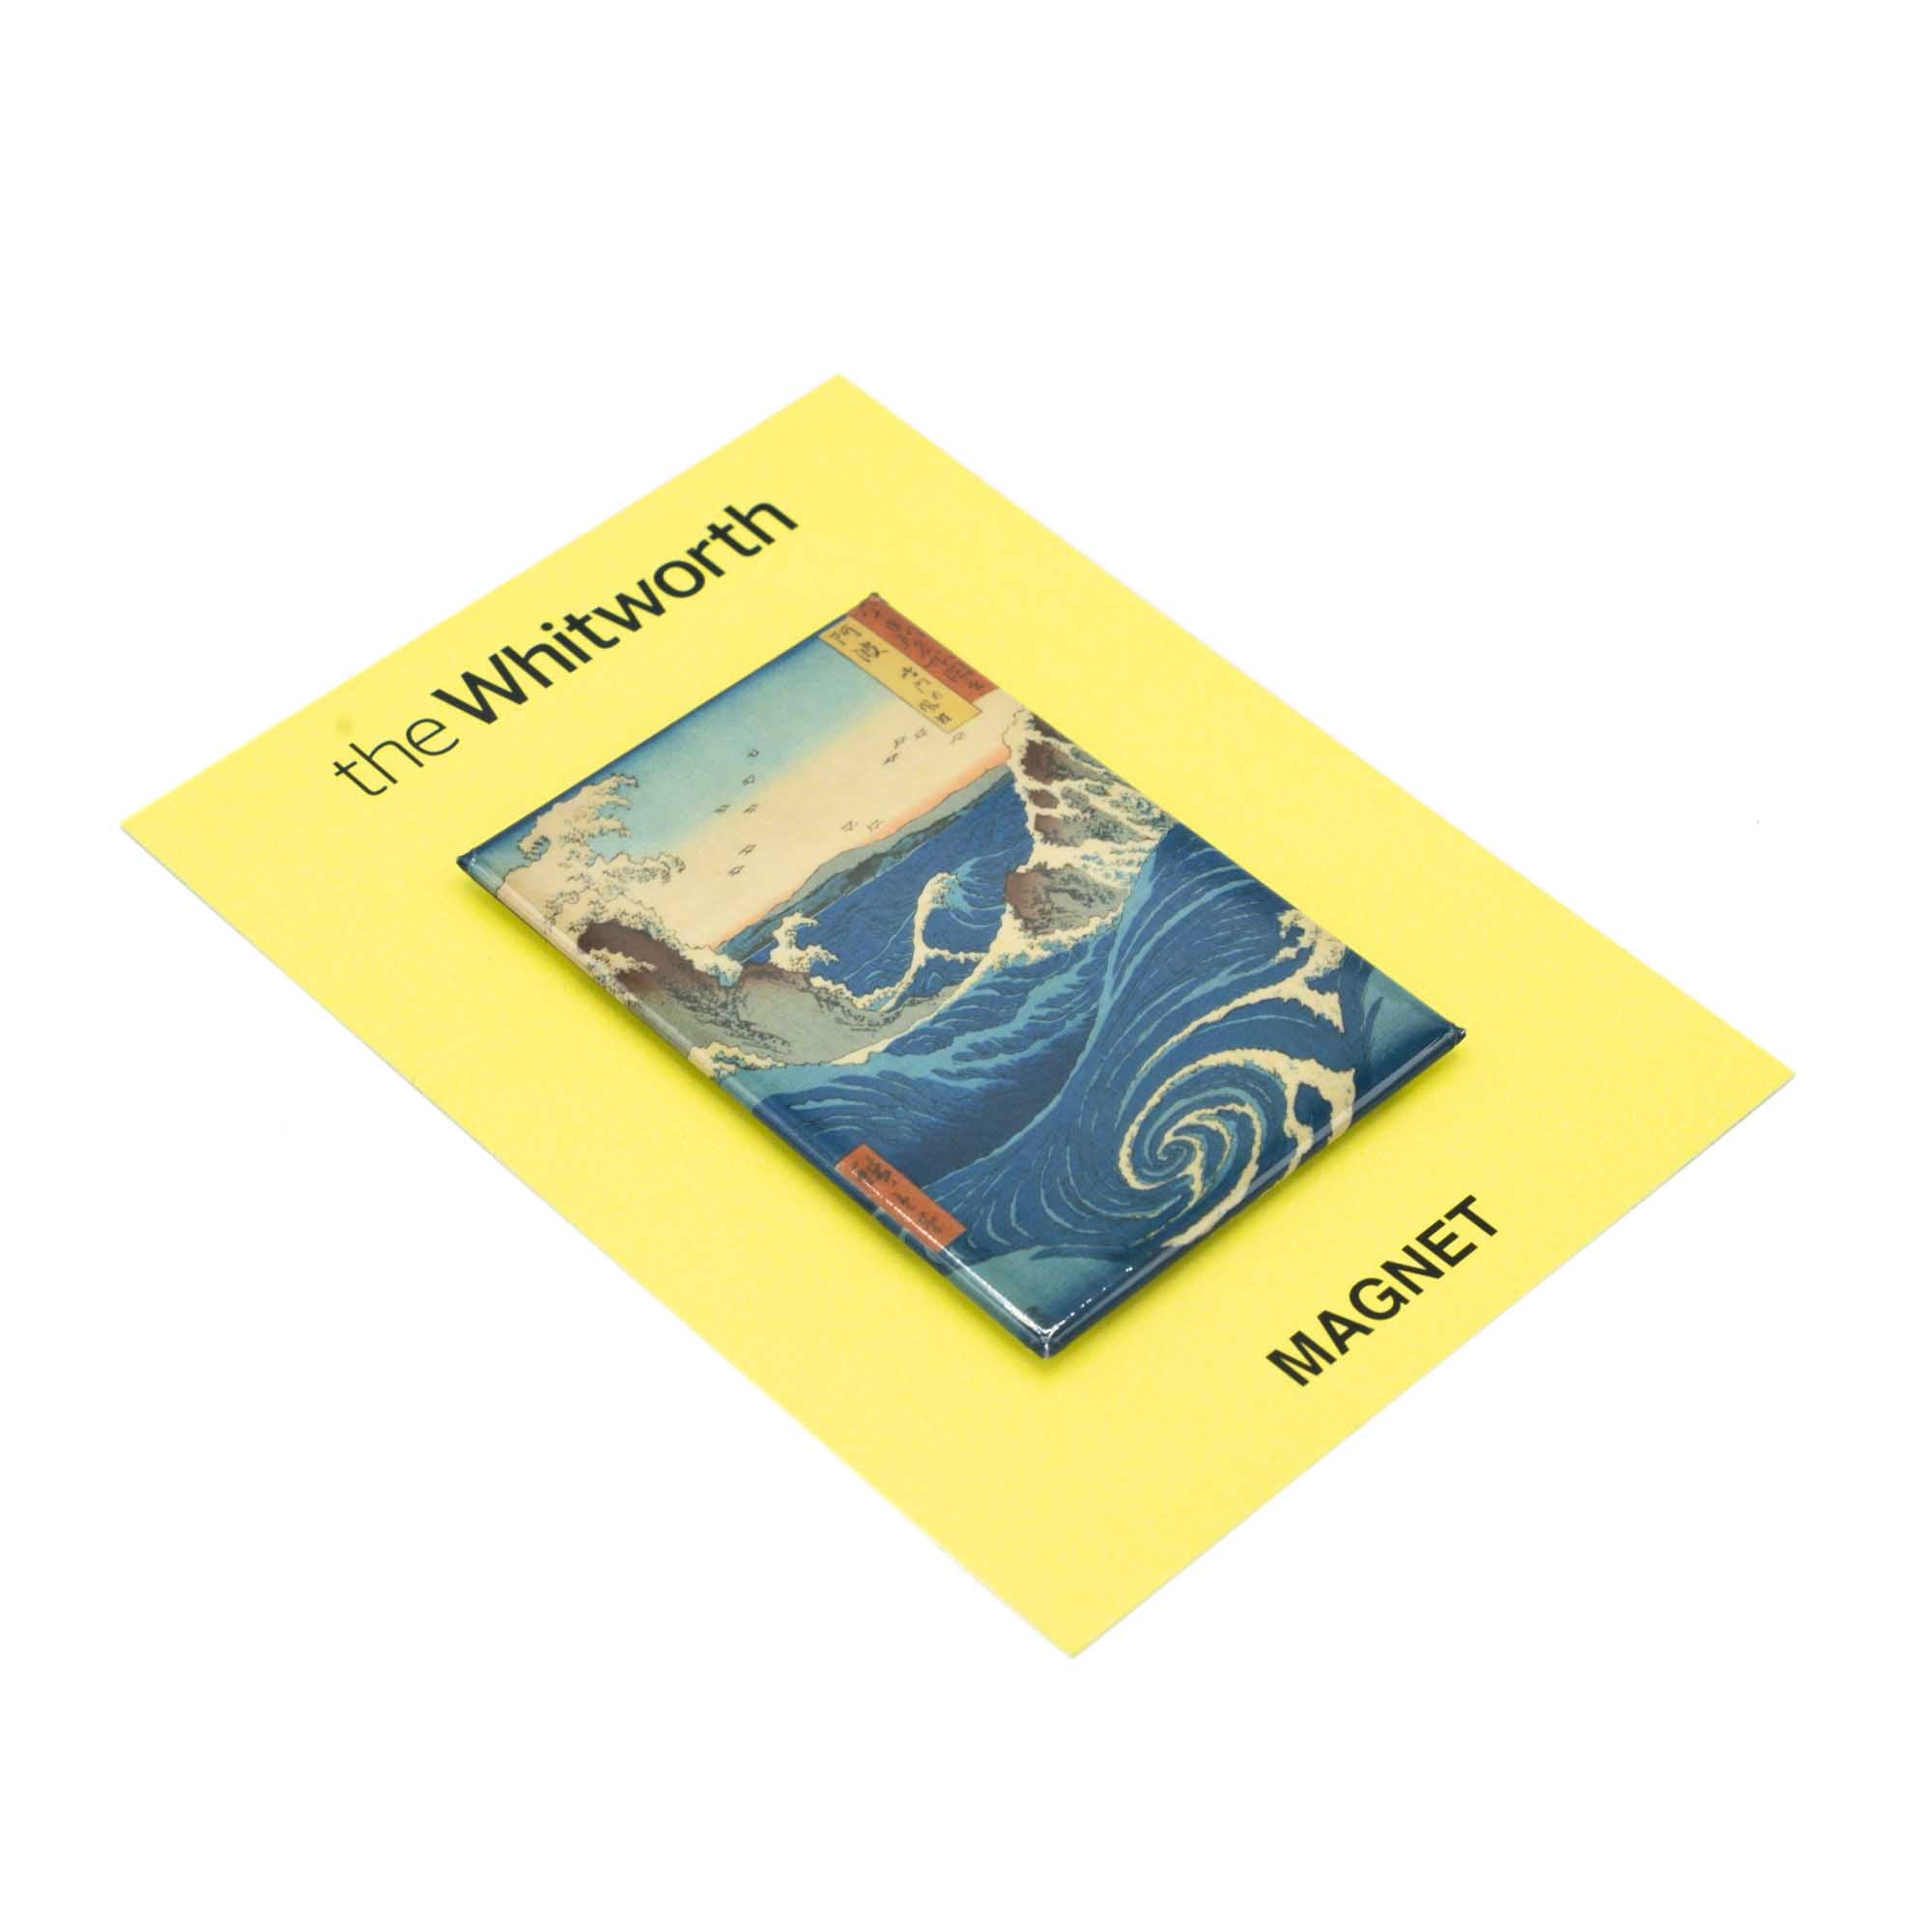 Magnet photographed against yellow Whitworth backing card and white background. The magnet features Naruto Whirlpool design